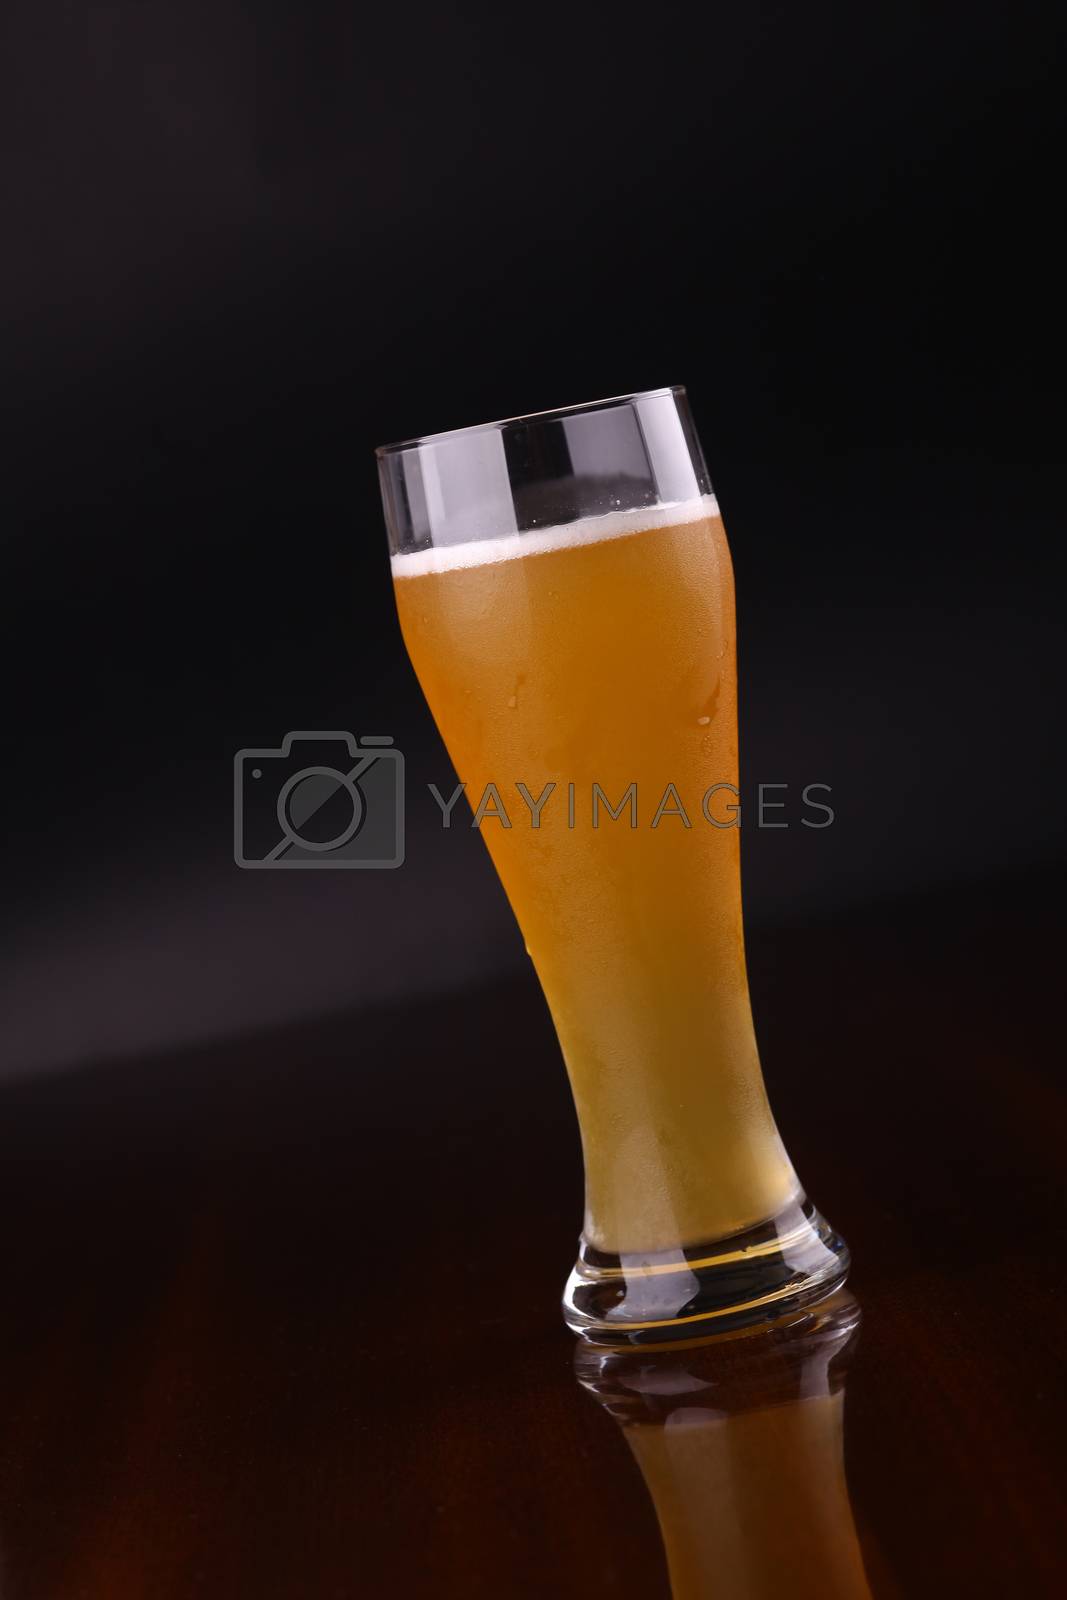 Royalty free image of Glass of beer by hiddenhallow